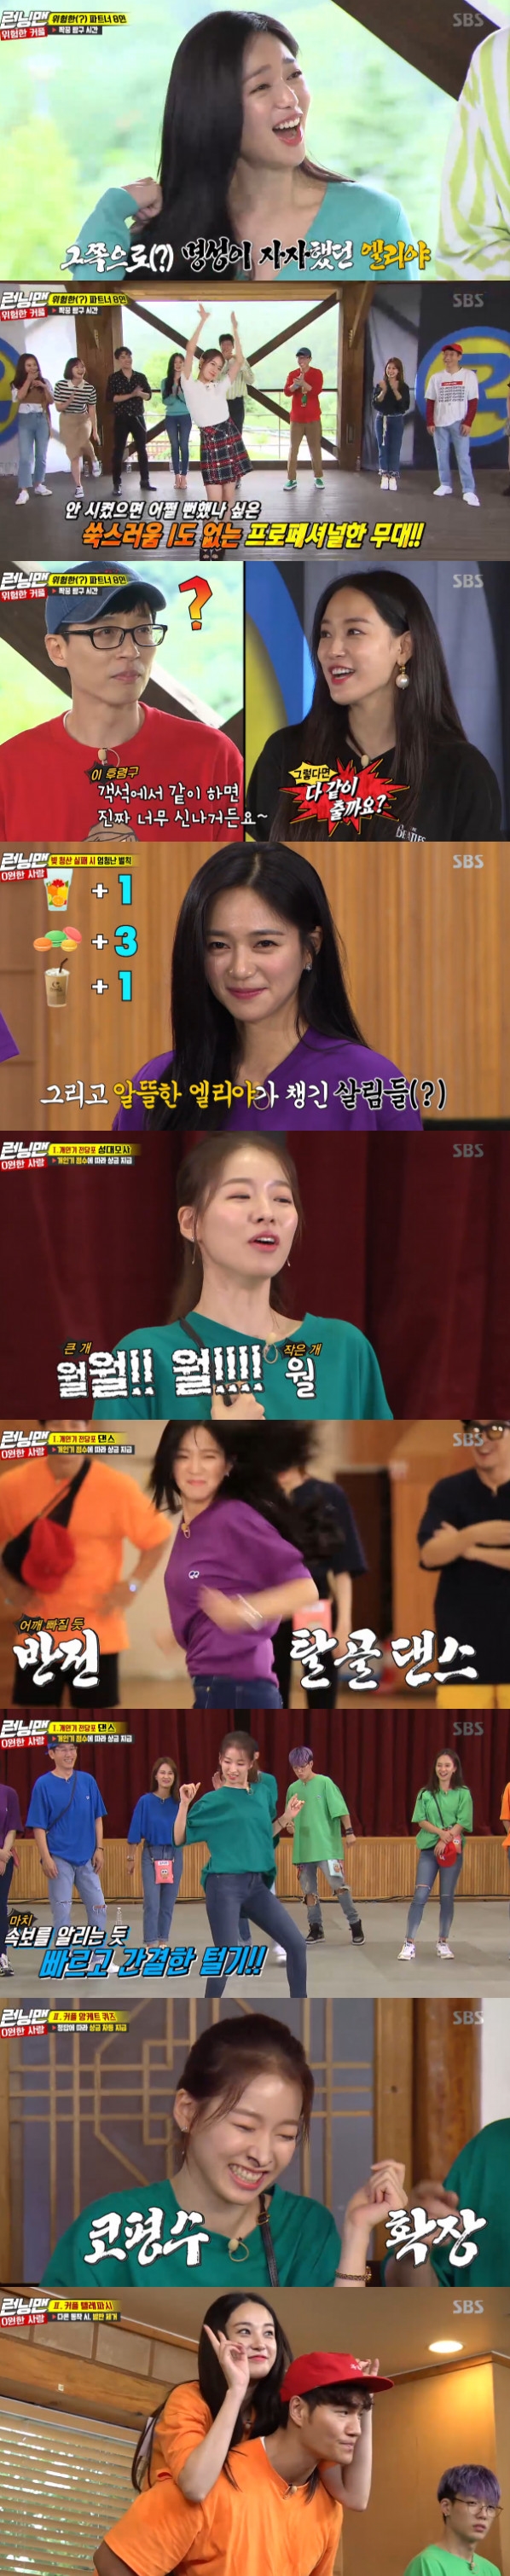 Actress trio Lee Elijah Lee Jia Lee Joo-yeon performed intensely in Running Man.On September 9, SBS Running Man featured Lee Joo-yeon, Lee Elijah, Lee Jia, Sunmi, icon Mamdouh Elsbiay, Bobby, Victory, and Kim Ji-min as guests, paired with each other.The race of the day was a mission for couples to collect their debts and to settle the penalties as much as the remaining amount if they could not pay off their debts.The members had to work with the guests to digest personal skills, balance, quizzes, couple telepathy, and human curling.Lee Joo-yeon, a former After School graduate who had an unexpected friendship with college student Jeon So-min, gave off a charm.The members have been calling Lee Joo-yeons full charm from the opening, called it Five Stones in the Music Industry and acknowledged that they are close friends with Running Man Representative Turning Jeon So-min.Lee Joo-yeon, who showed off the dignity of the sexy Deva by showing the After School hit song Deva choreography, is excited and said, Will we all go?I do not know when I can see the dance with After School, said Yoo Jae-Suk, I do not see it, and laughed firmly.In addition, Lee Joo-yeon said, I went to school early because I was good at the club. From Lee Kwang-soo, Do you have any hypocrisy?, And in the personal showdown, I made a cat sound and lifted my long hair suddenly and made the other person laugh.In addition, he shows his fathers vocal simulation to make the members absurd, and after failing to bluff with his personal period walking with his hand, he is disappointed with his nervousness, saying, I can not walk but swings rather than tanna (?), as well as Lee Joo-yeon, who was on his partner Kim Jong-guk, shouted Brother Cap!, which made him doubt his age.Lee Elijah, who is eating Lee Kwang-soo and a rice bowl, was also noticed as a stone + child recognized by Lee Kwang-soo.Especially Lee Elijah was a dance showdown.Lee Elijah, unlike his innocent appearance, reinterpreted the news signal song with a reverse dislocated dance intensely, and devastated the filming scene, making the atmosphere hot with victory and unexpected I want to know couple dance.More than anything, the serious expression surprised everyone.Lee Jia, a girl group from Chichi, also gave off a special talent and led the fun of Running Man.Lee Jia appeared in a state of no embarrassment, shaking her body excitedly and leaving her with a gentle exit, showing off her unusual presence.In addition, 8 oclock news music to the shuffle dance and the sound of the water to give a dance.Lee Jia said, Its funny every time my brother looks the same as Lee Kwang-soo, his brothers nickname is Lee Kwang-soo, but he doesnt like it.It looks so much the same in reality, he said, laughing and making Lee Kwang-soo hot.In the vocal simulation showdown, the dog fight was unintentionally triggered by the individualization of the bullshit, and the audience was surprised by the unique individuality of the tongue on the elbow.Here, he also laughed at the viewers by digesting the punishment of humiliation that increased the level of nostrils.The fierce confrontation resulted in the Haha & Sunmi, Yang Se-chan & Mamdouh Elsbiay, Lee Kwang-soo & Lee Elijah team being penalized.bak-beauty